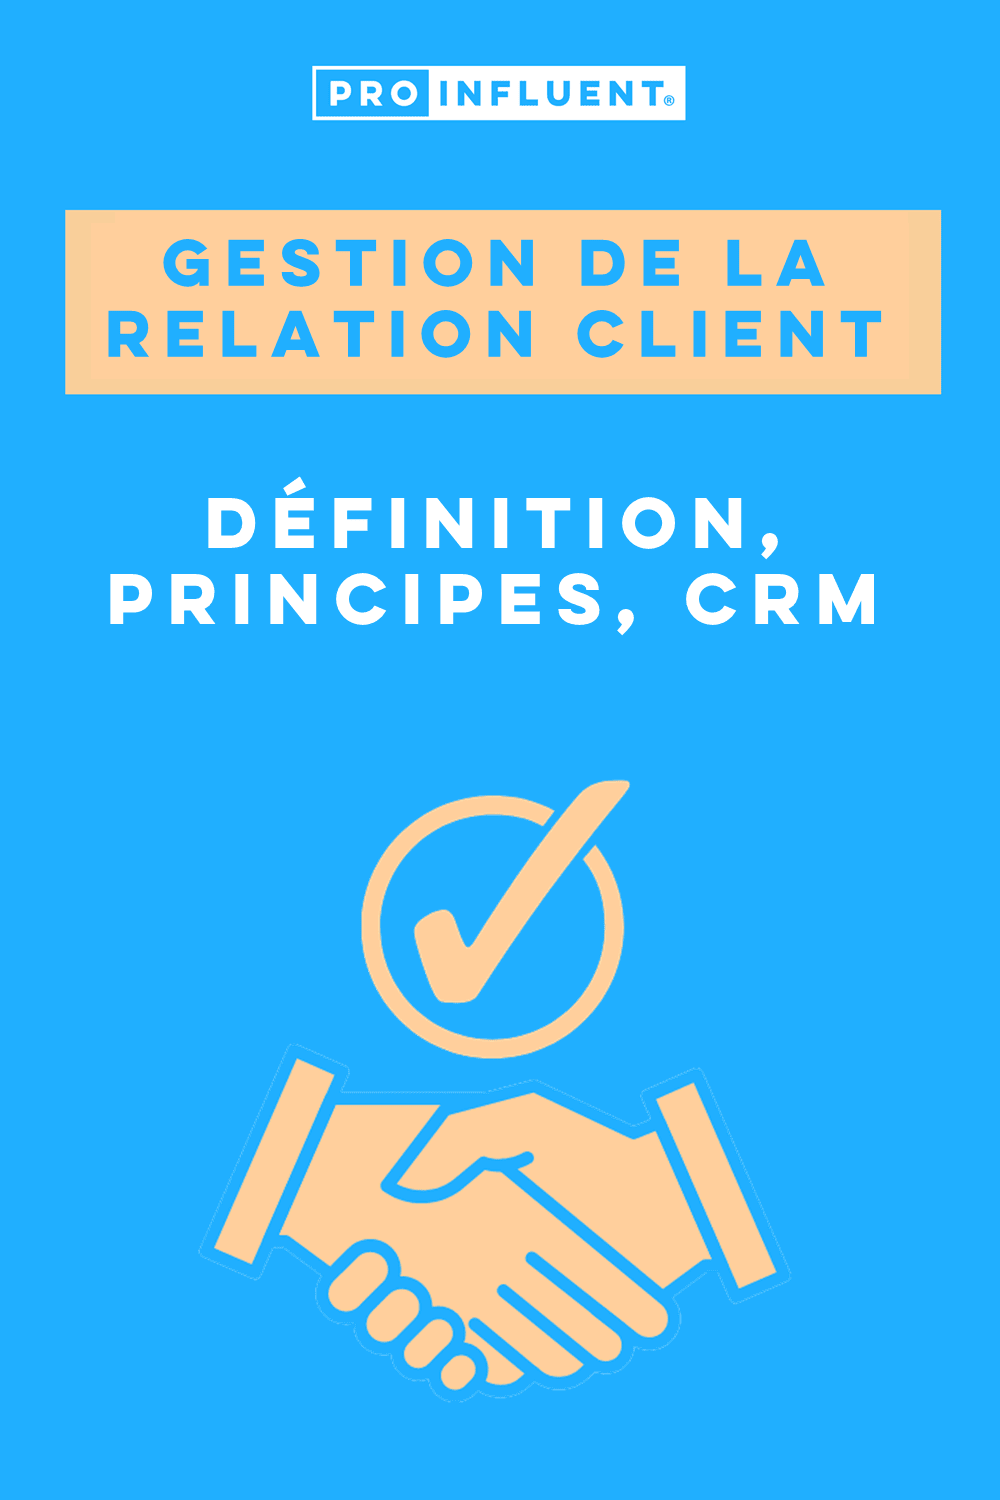 Customer relationship management: all you need to know! Definition, principles, CRM